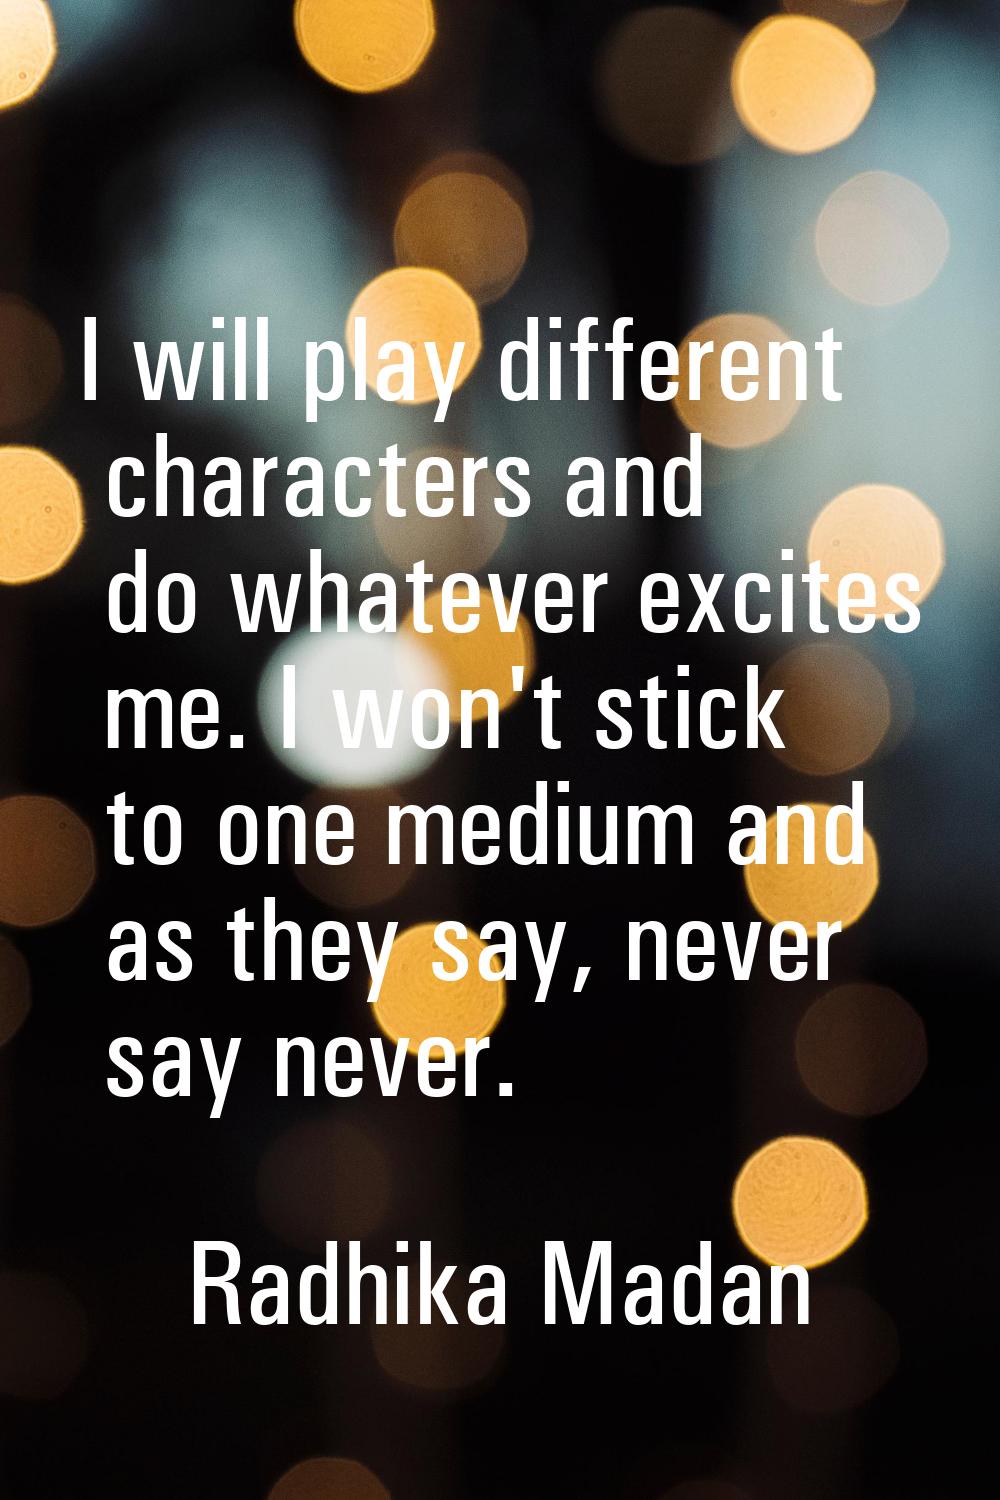 I will play different characters and do whatever excites me. I won't stick to one medium and as the